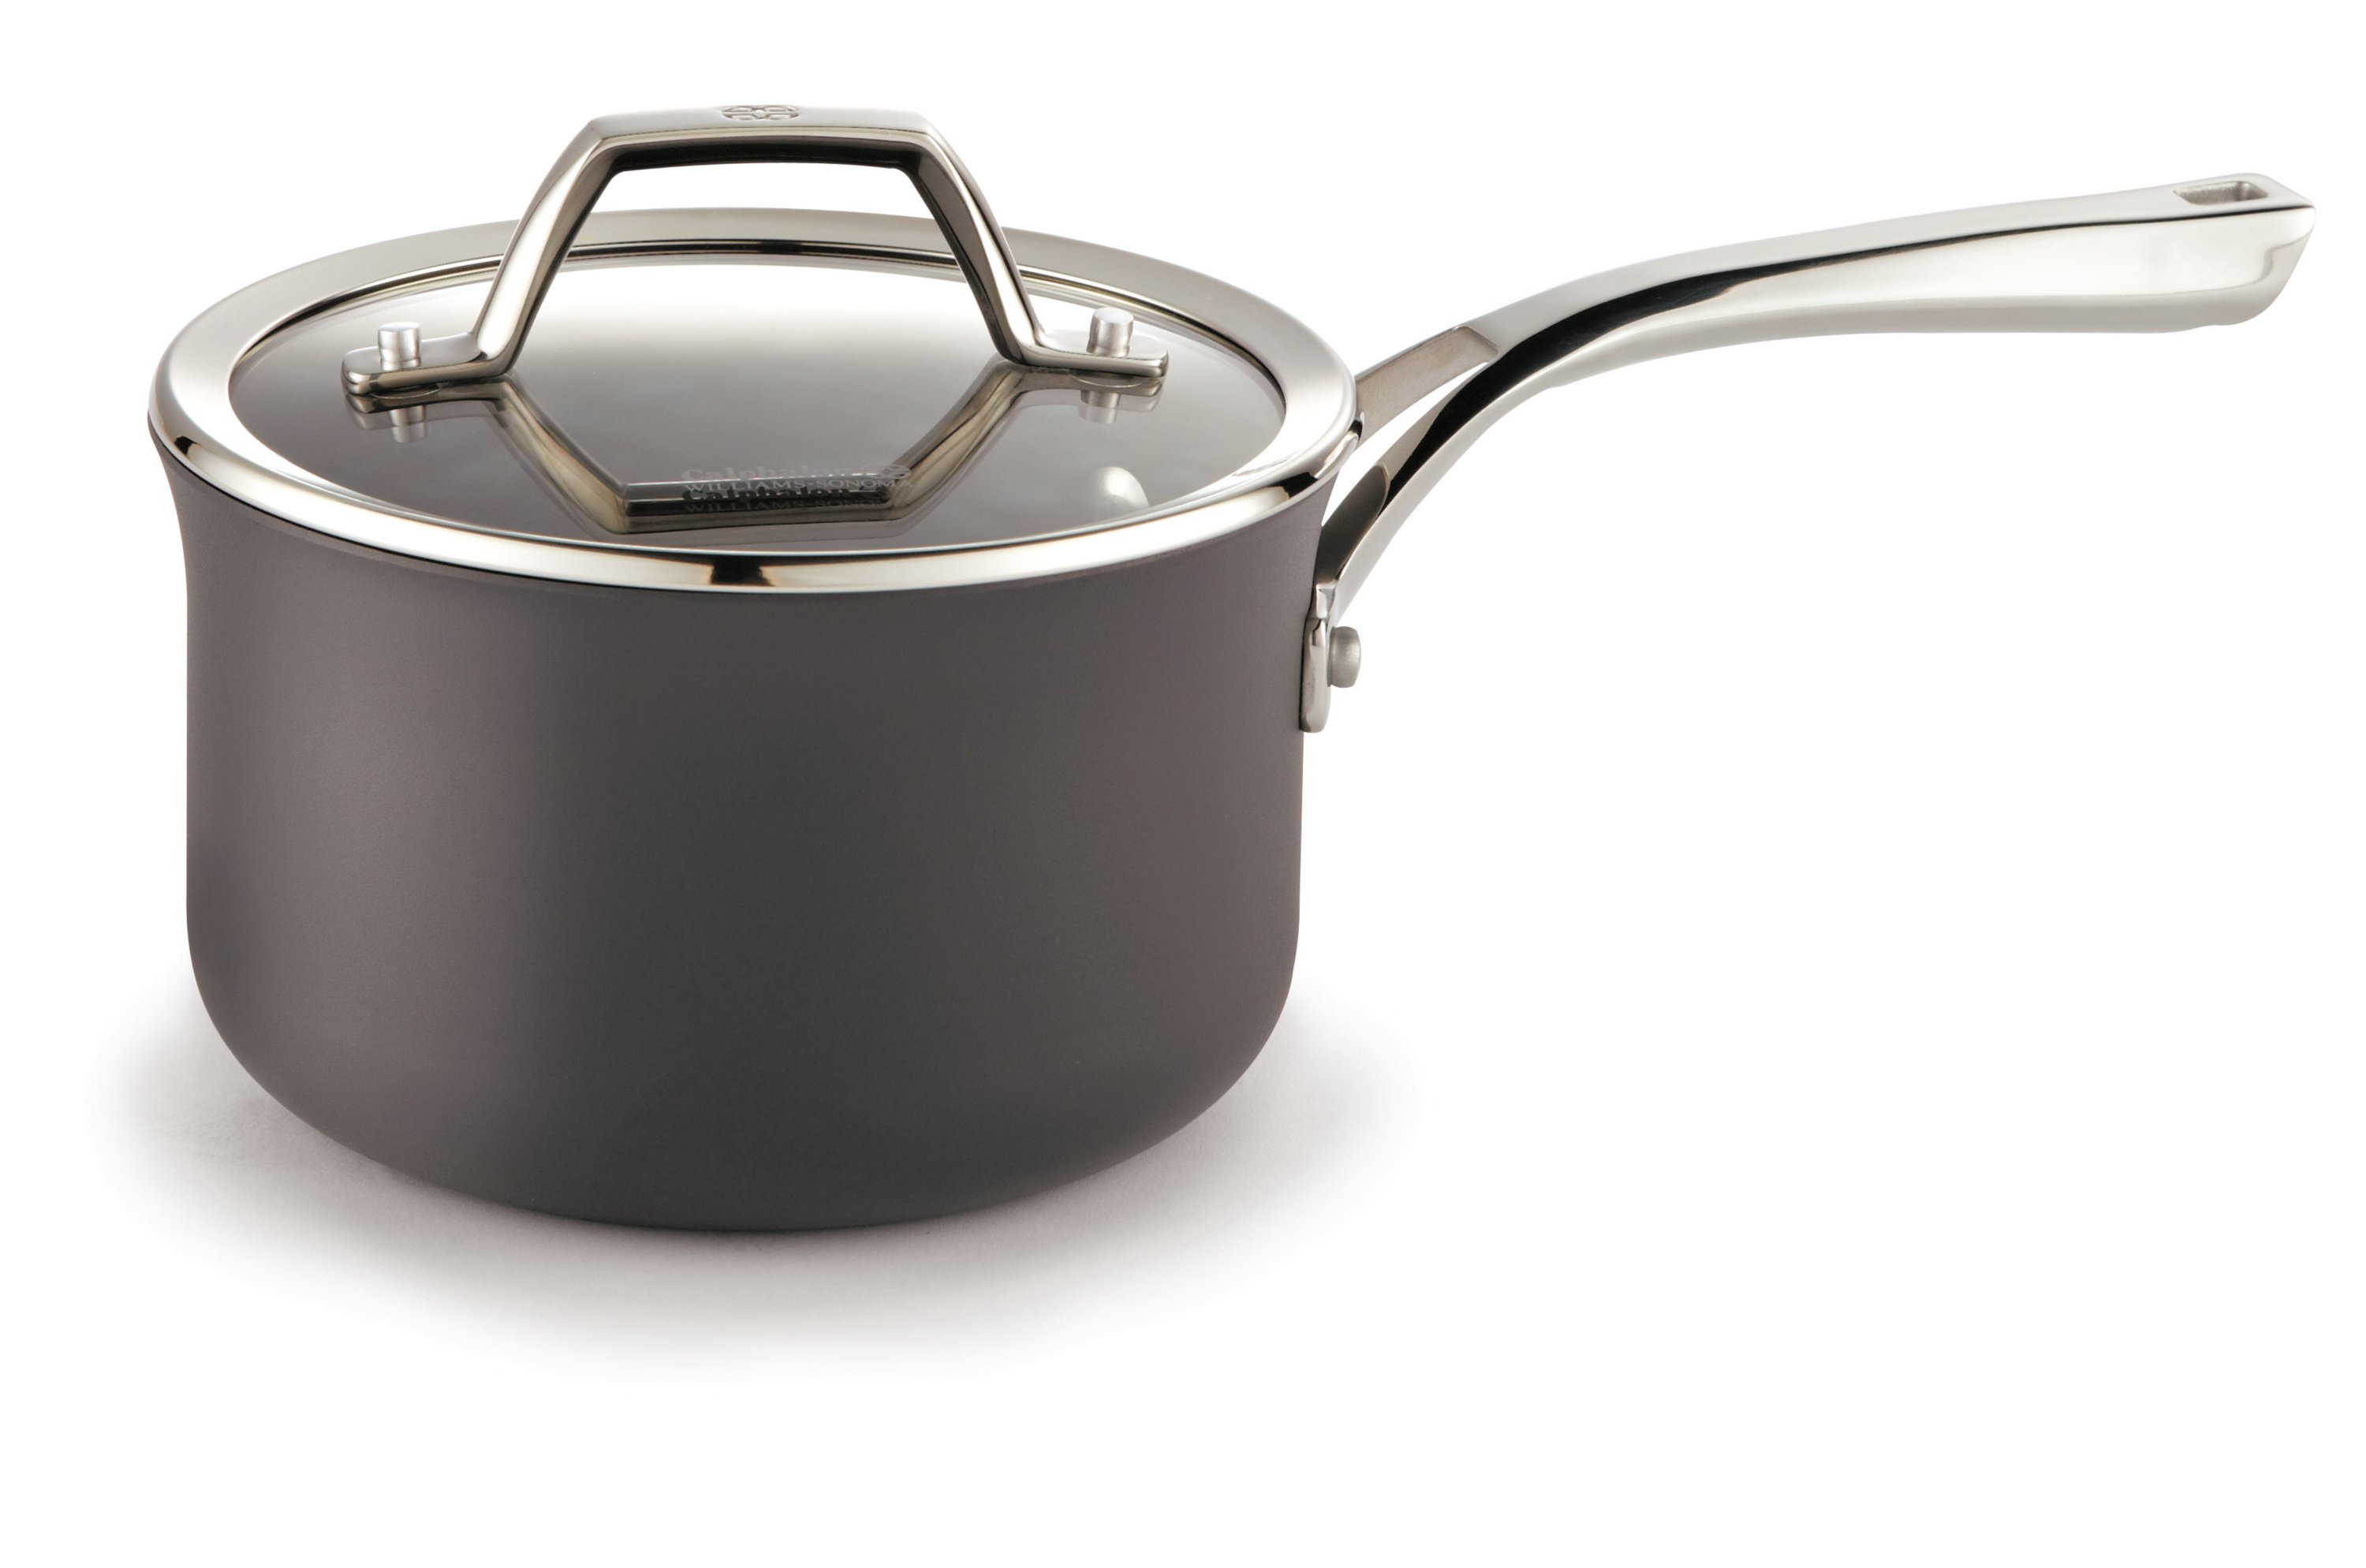 Calphalon Select 2.5 qt. Stainless Steel Sauce Pan with Glass Lid